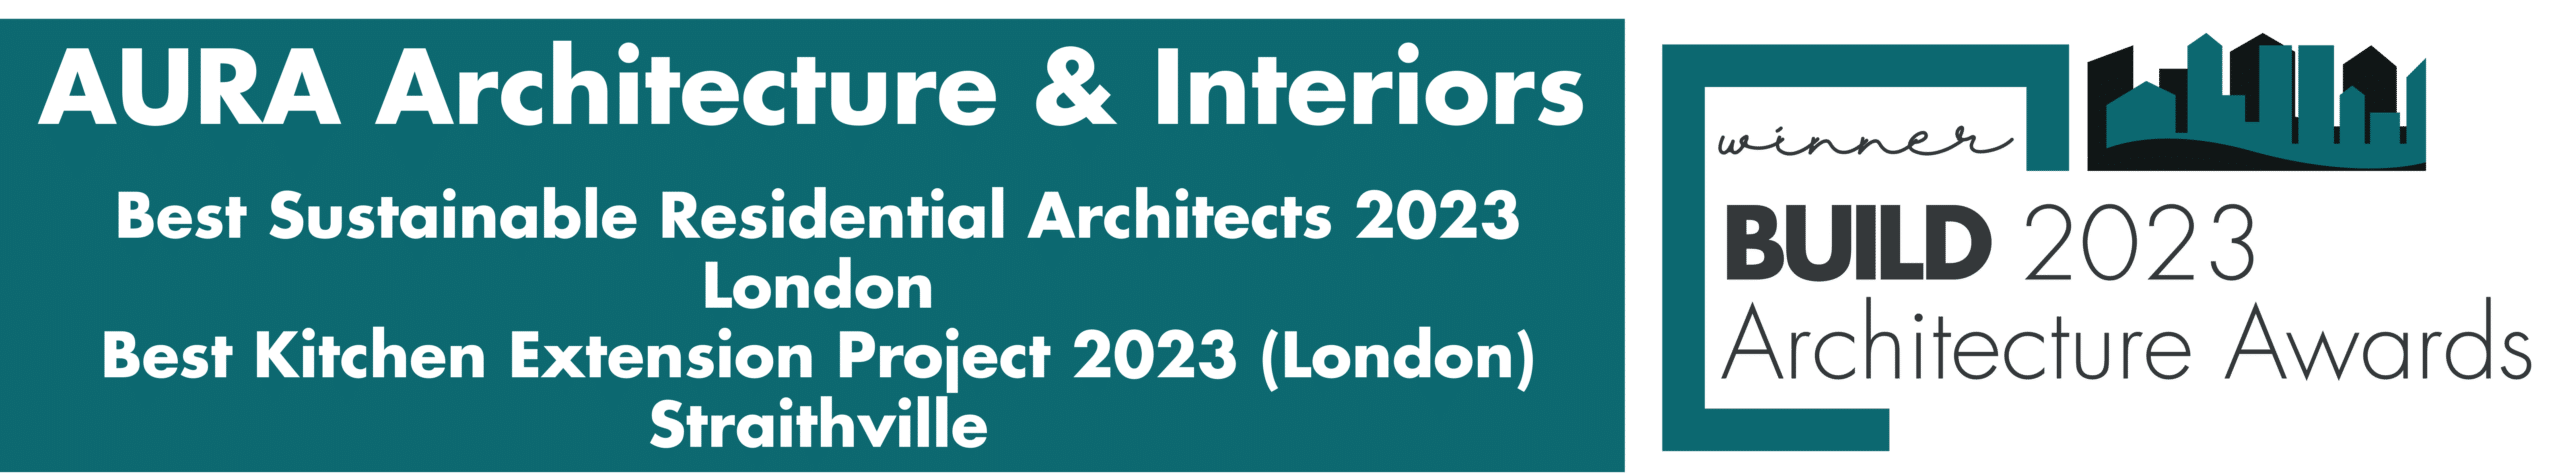 Build 2023 award winner AURA Architecture & Interiors. "Best sustainable Residential Architects London 2023. Best Kitchen Extension Project 2023 (London)